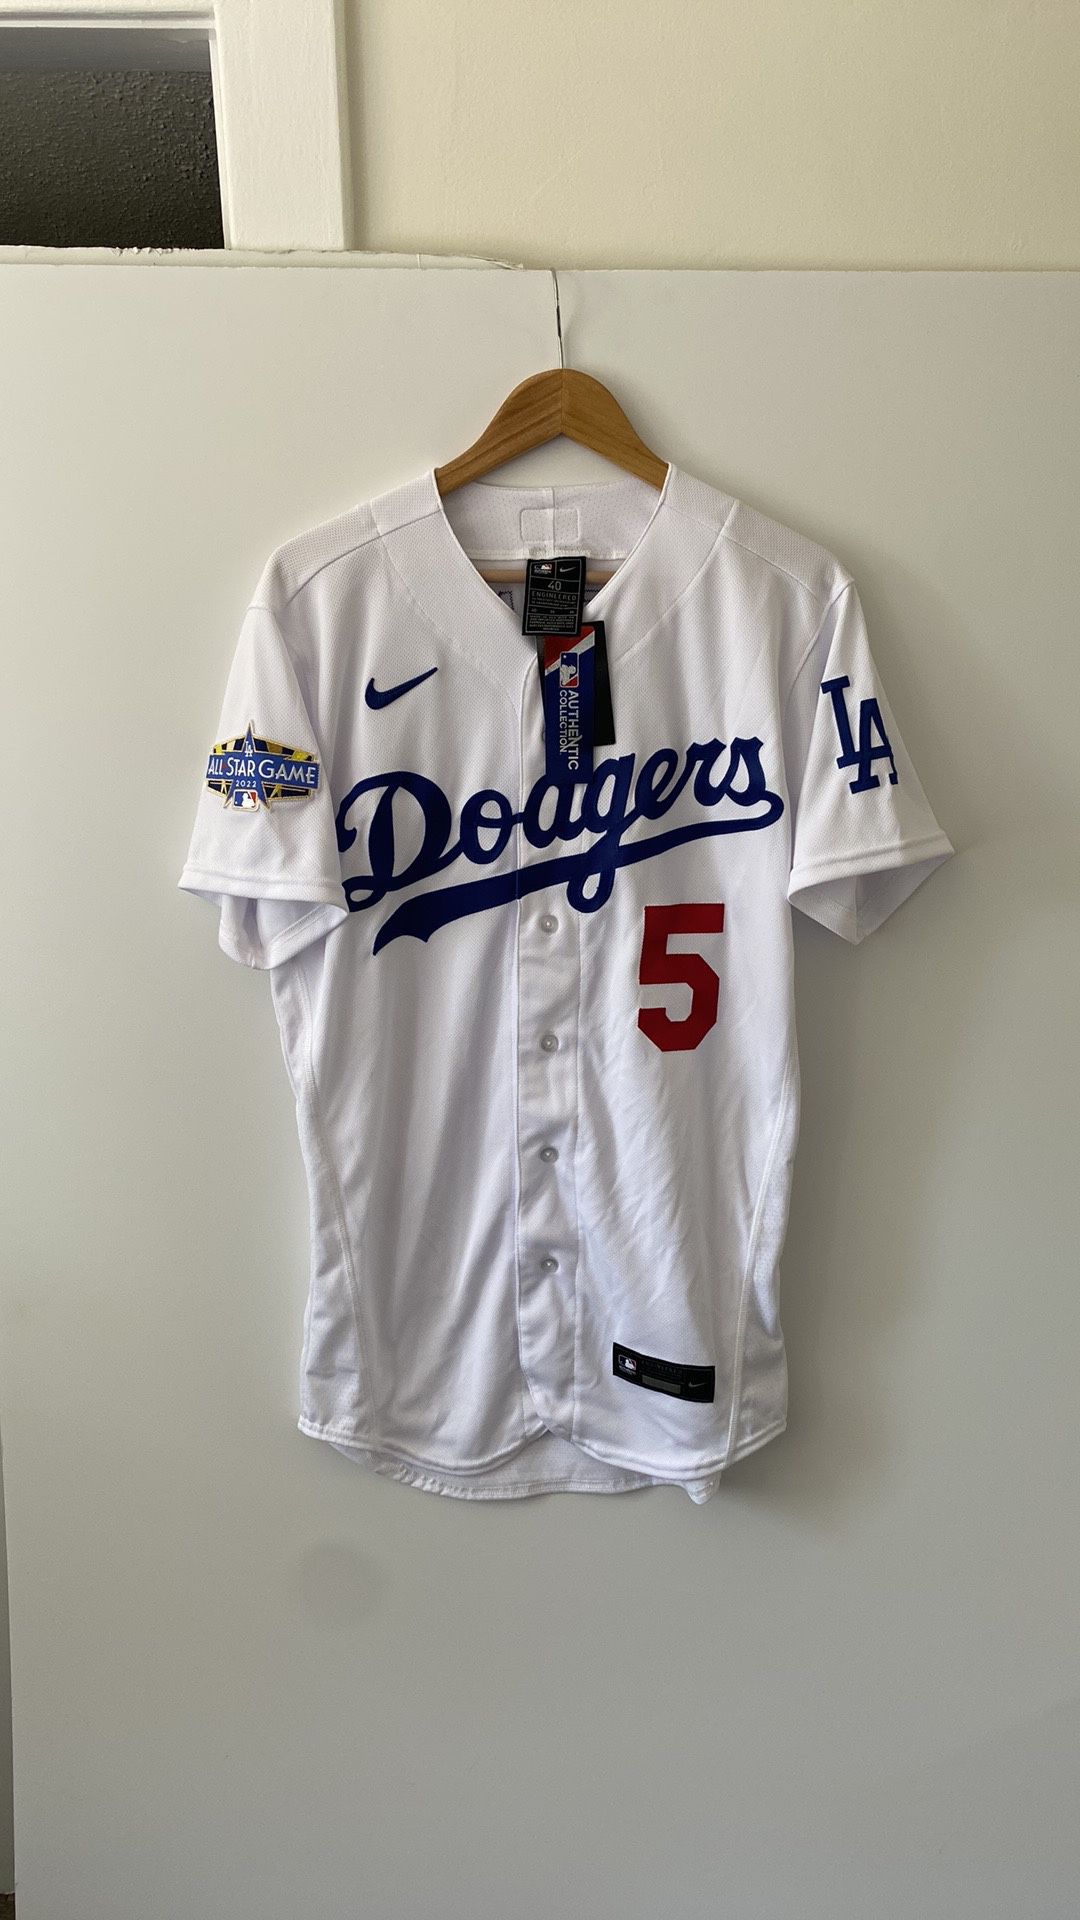 Nike Authentic Dodgers Freddie Freeman Jersey for Sale in Pasadena, CA -  OfferUp